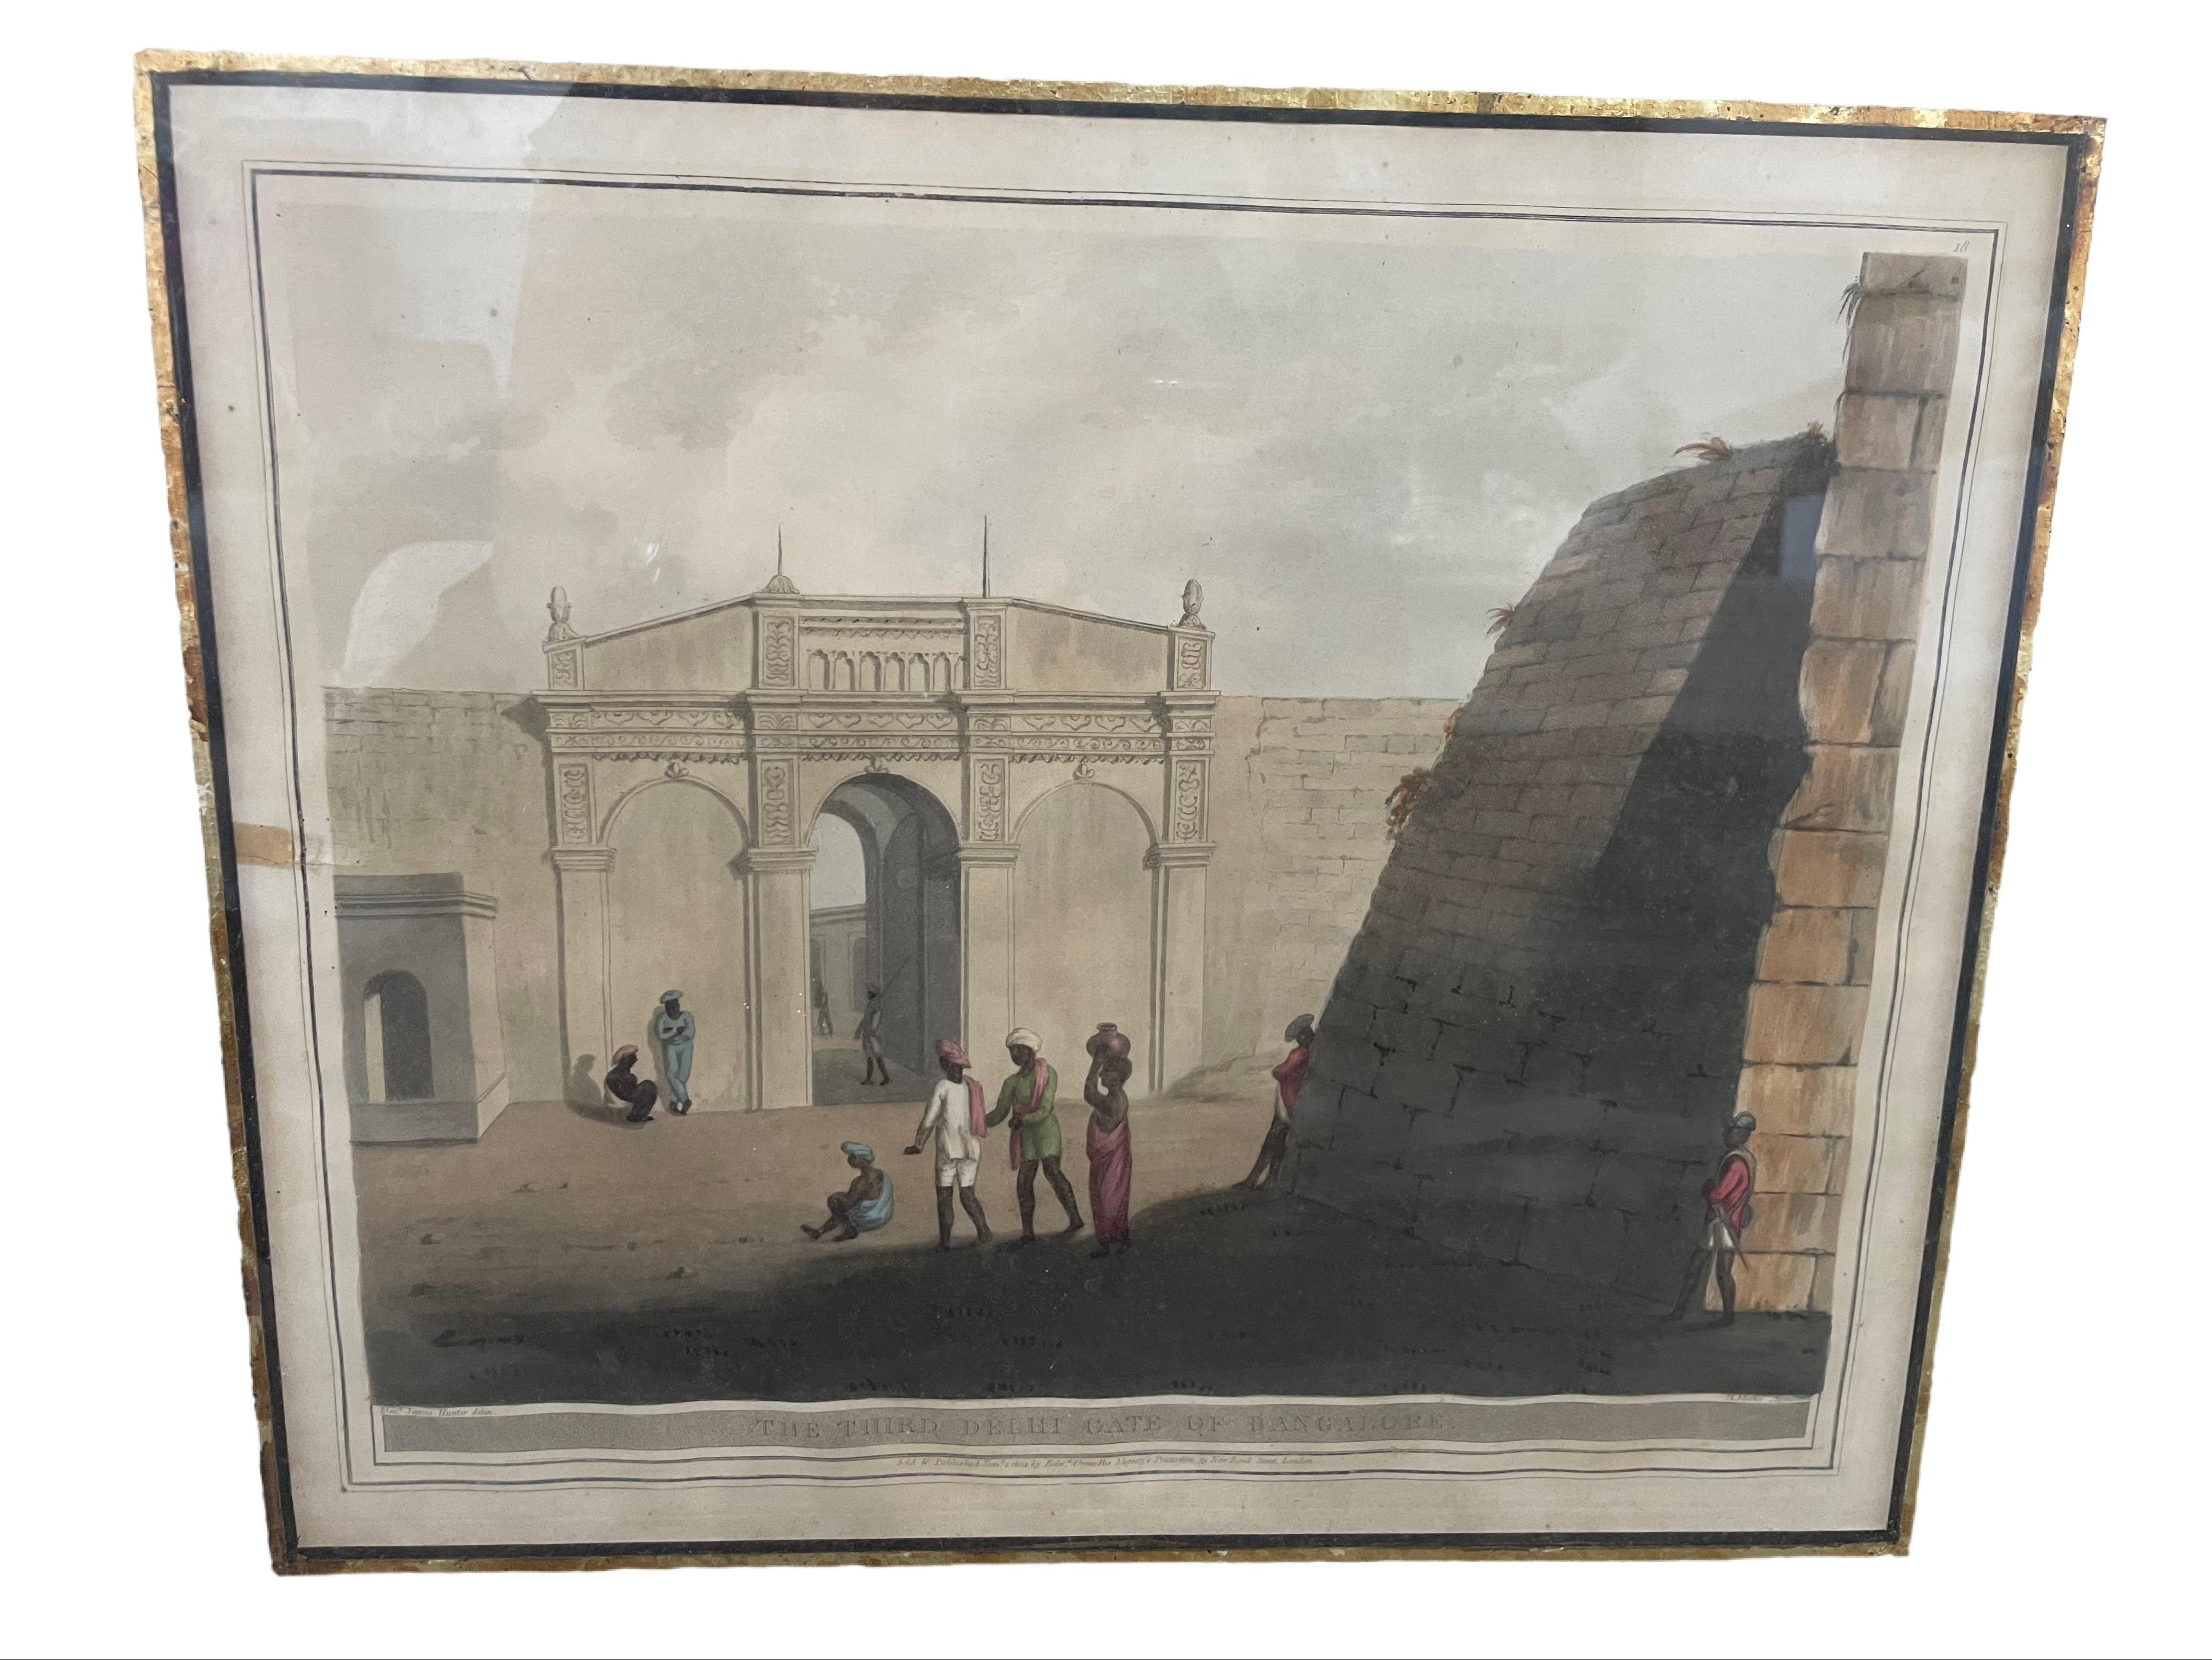 These mid-18th century prints, originally painted by British military officer and artist Lt. James Hunter during his service in India, depict images of landscapes, military posts and royal residences. Hunter's prints are considered to be some of the